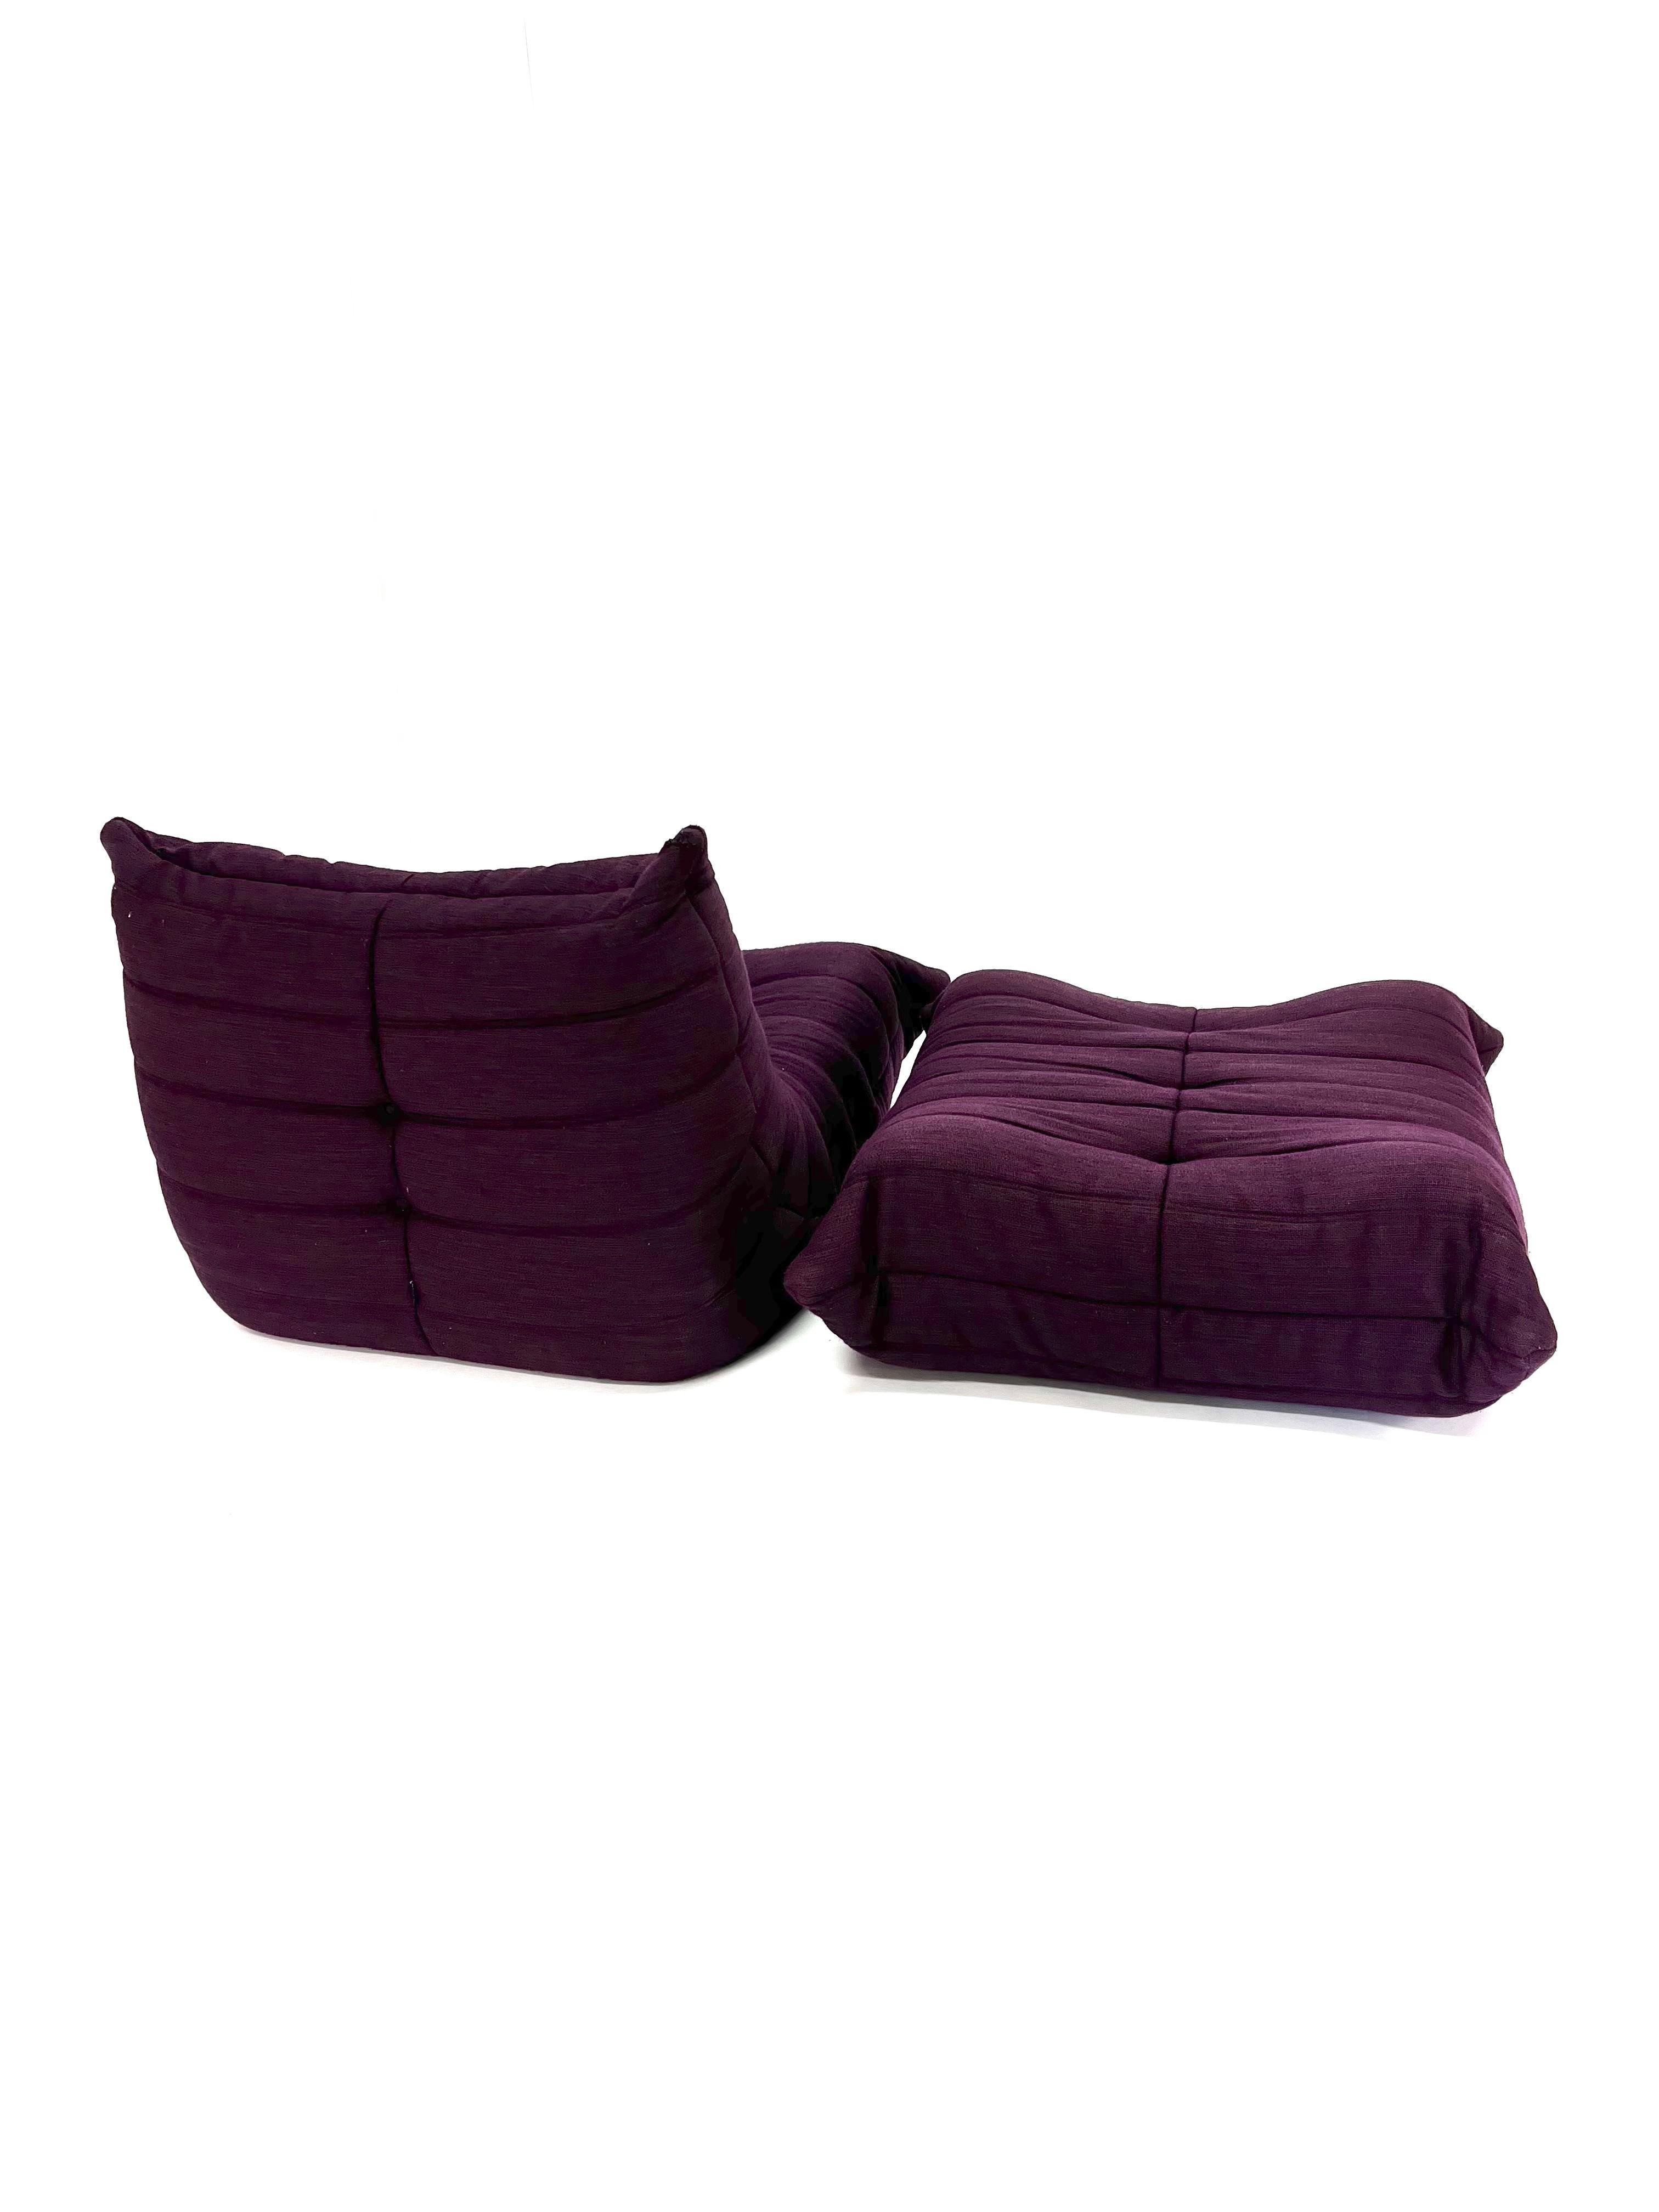 Togo Chair and Ottoman in Purple by Michel Ducaroy for Ligne Roset For Sale 10